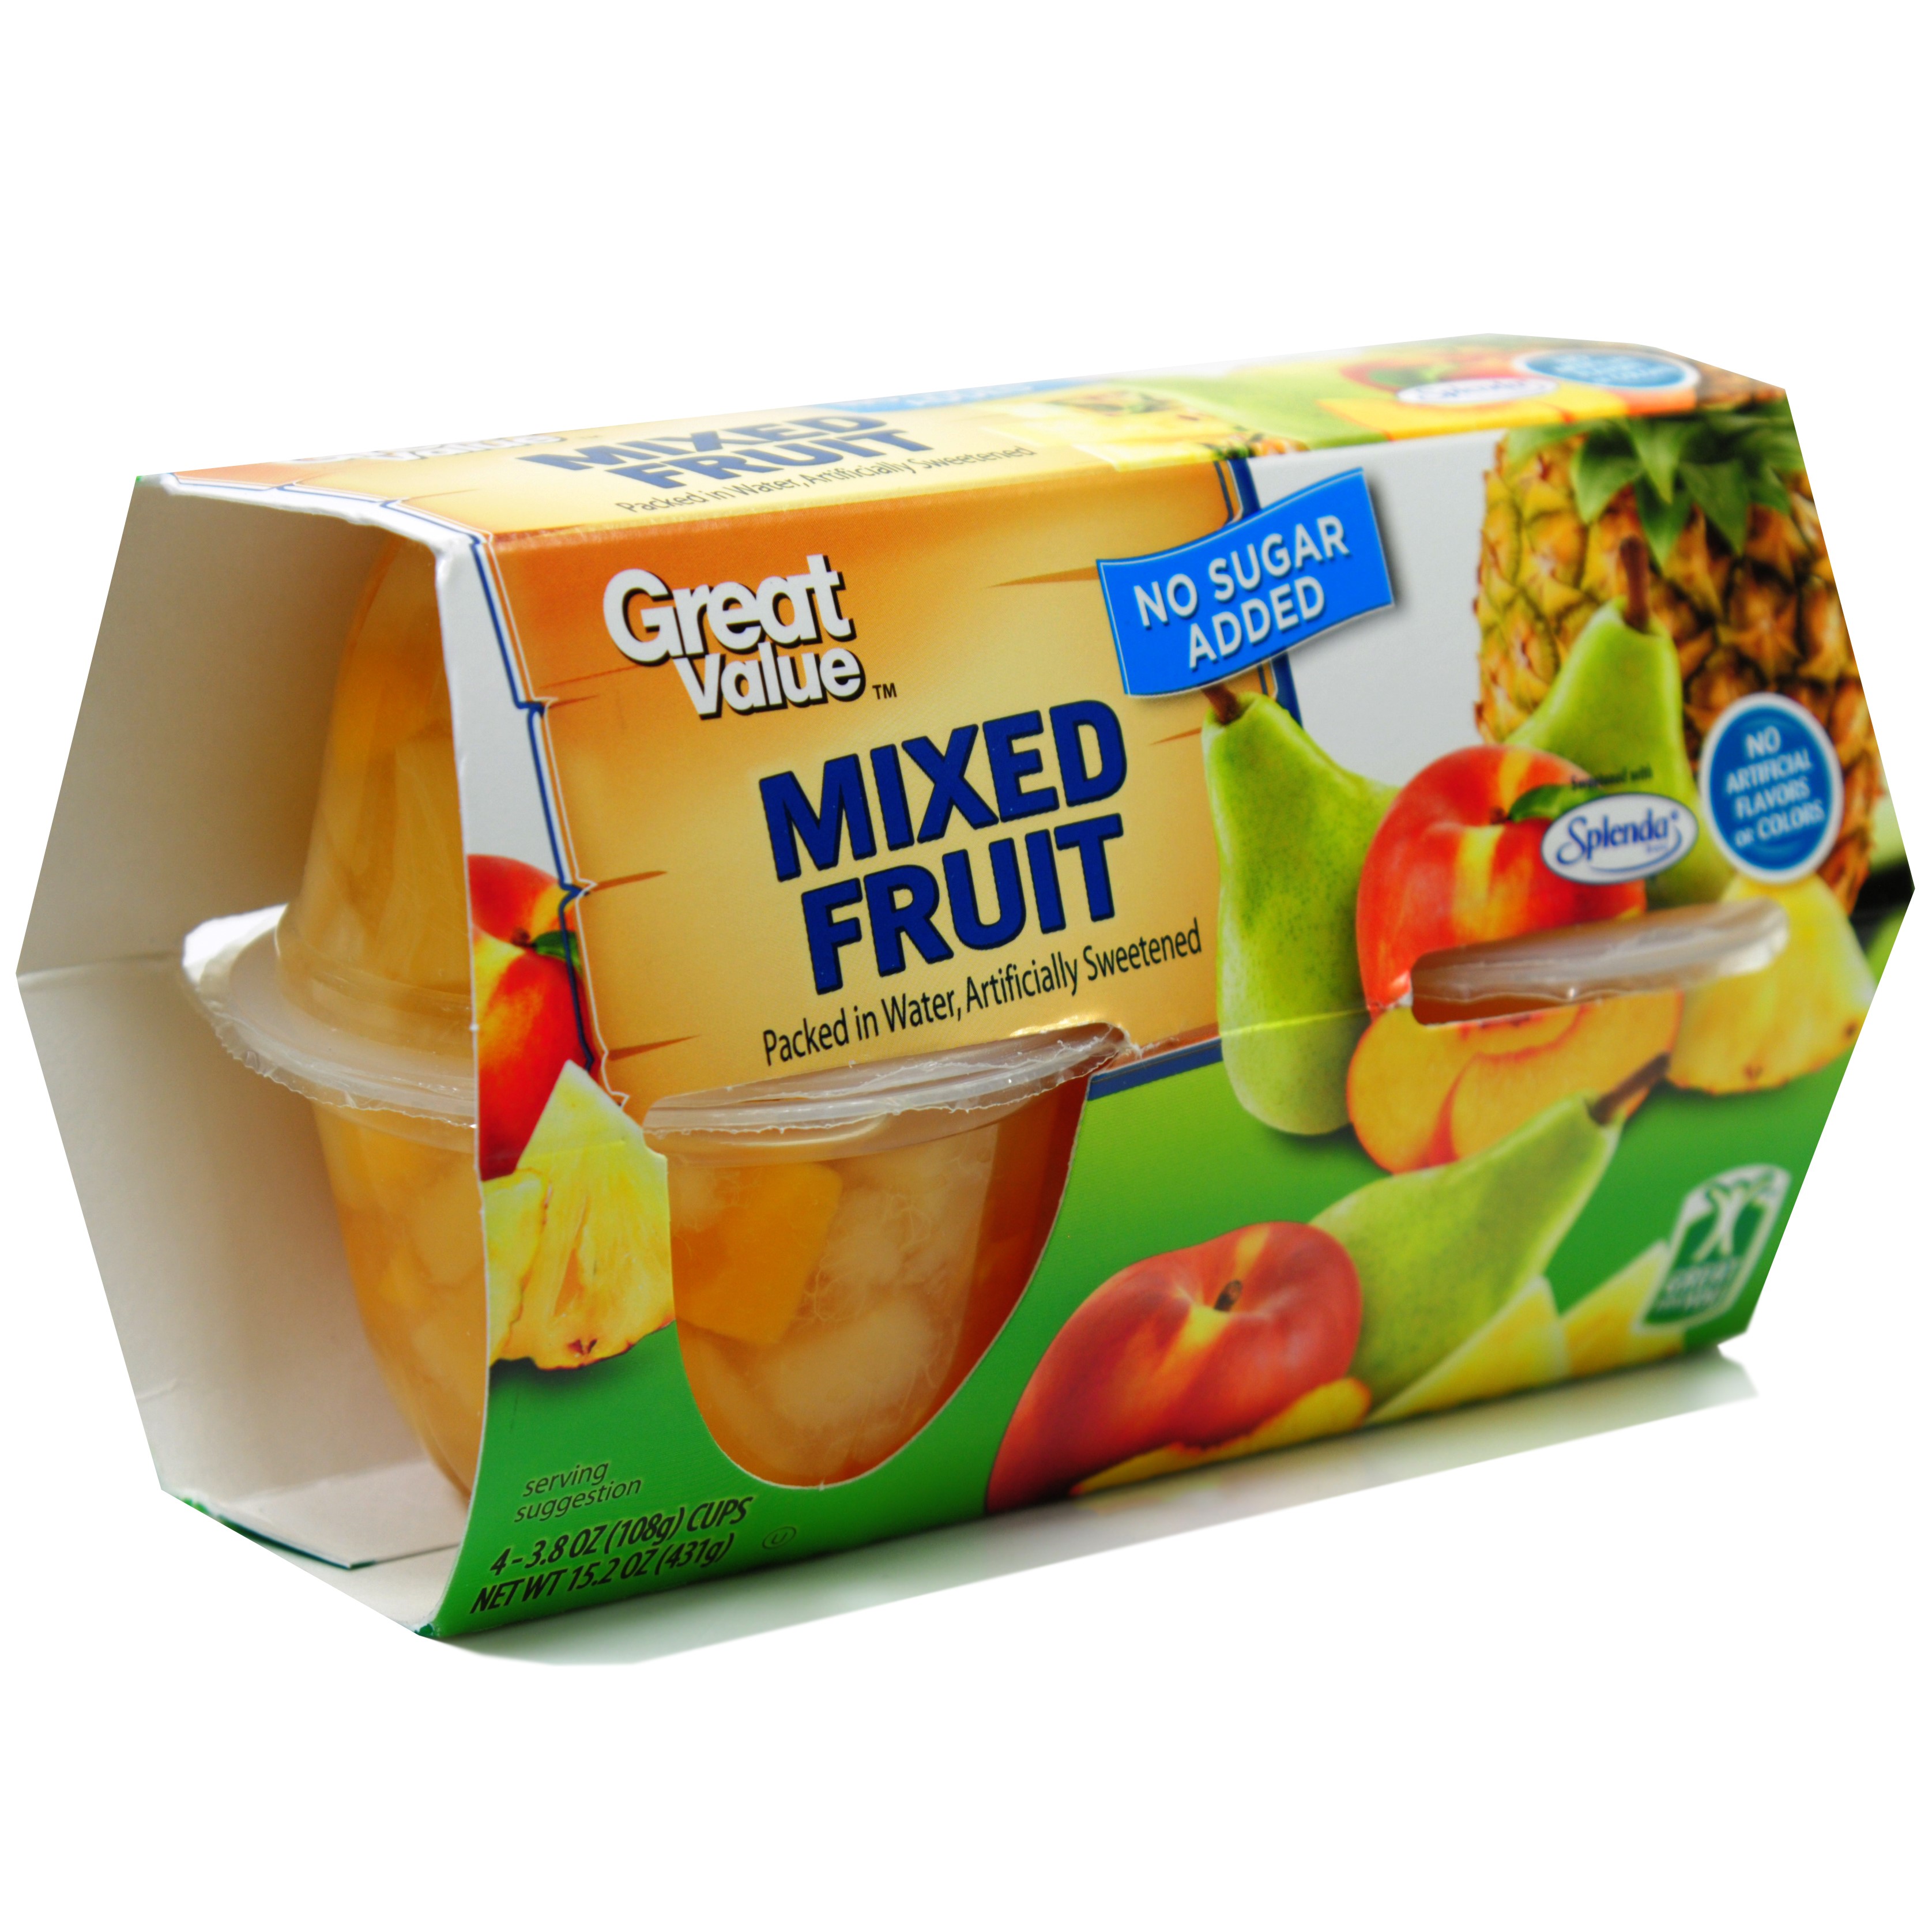 Great Value Mixed Fruit, 3.8 Oz, 4 Count Image